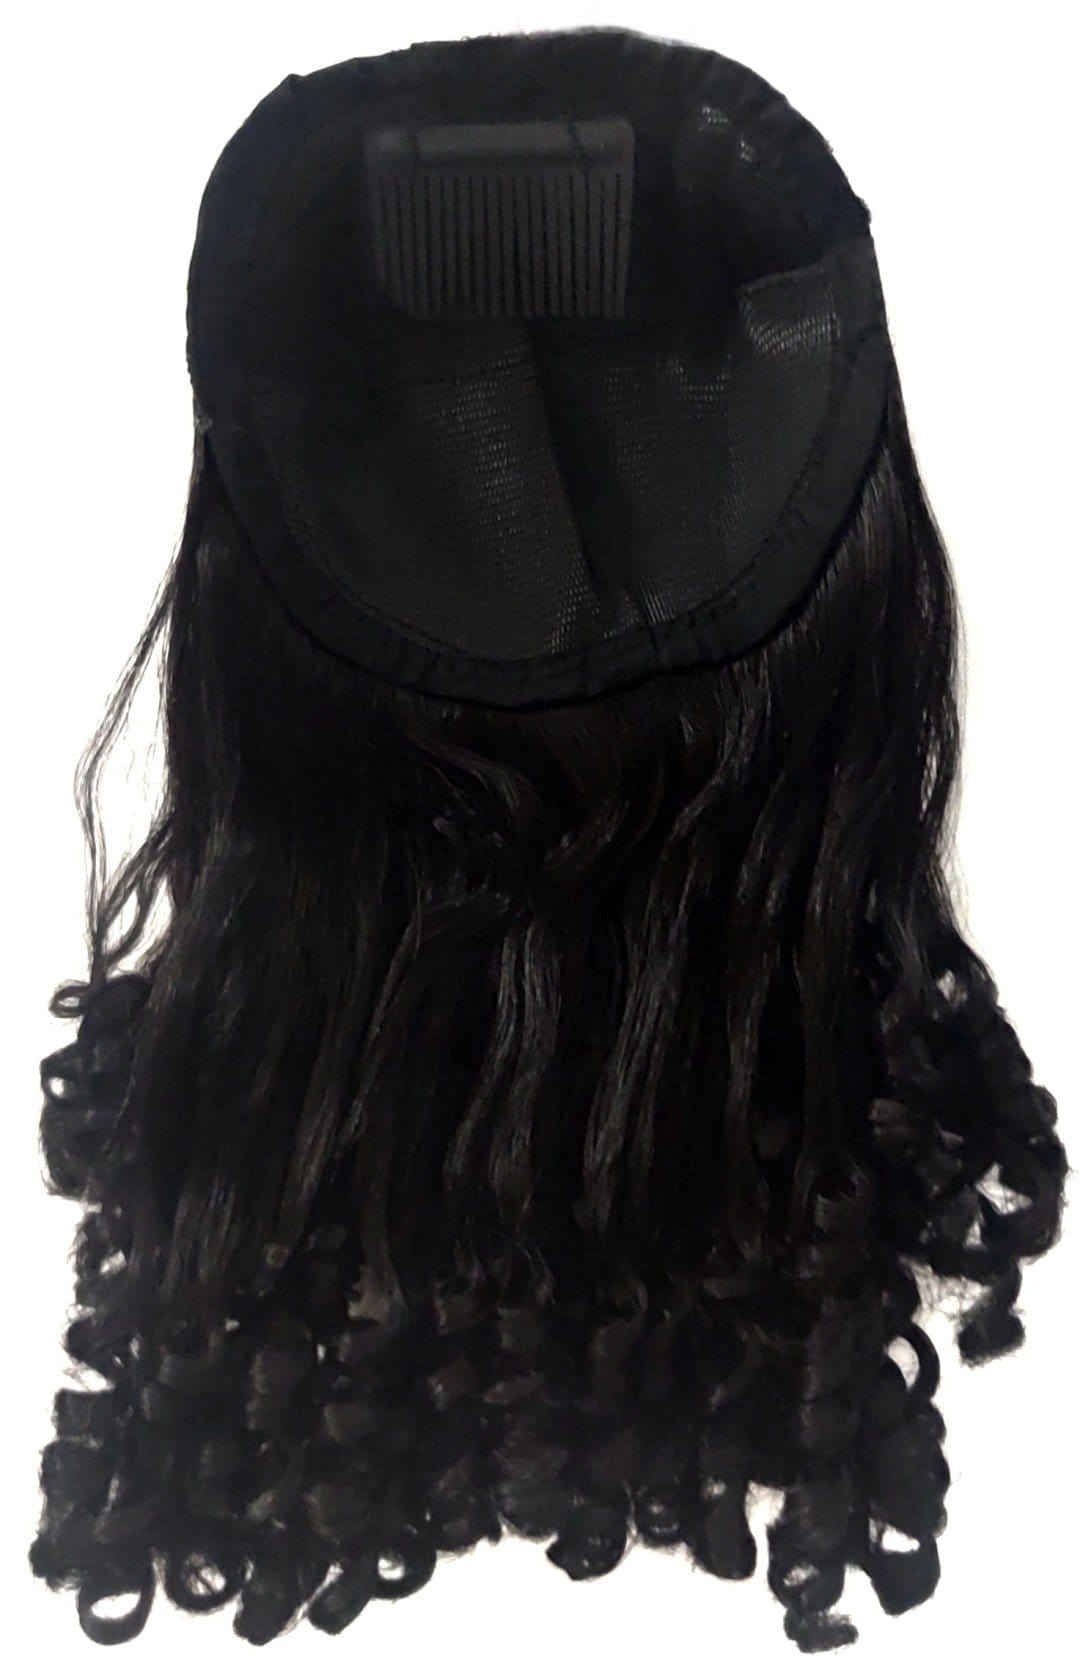 Lamansh Synthetic Hair Black / 24 inch / Curly Lamansh™ Black Curly Clip in Hair Extensions For Girls